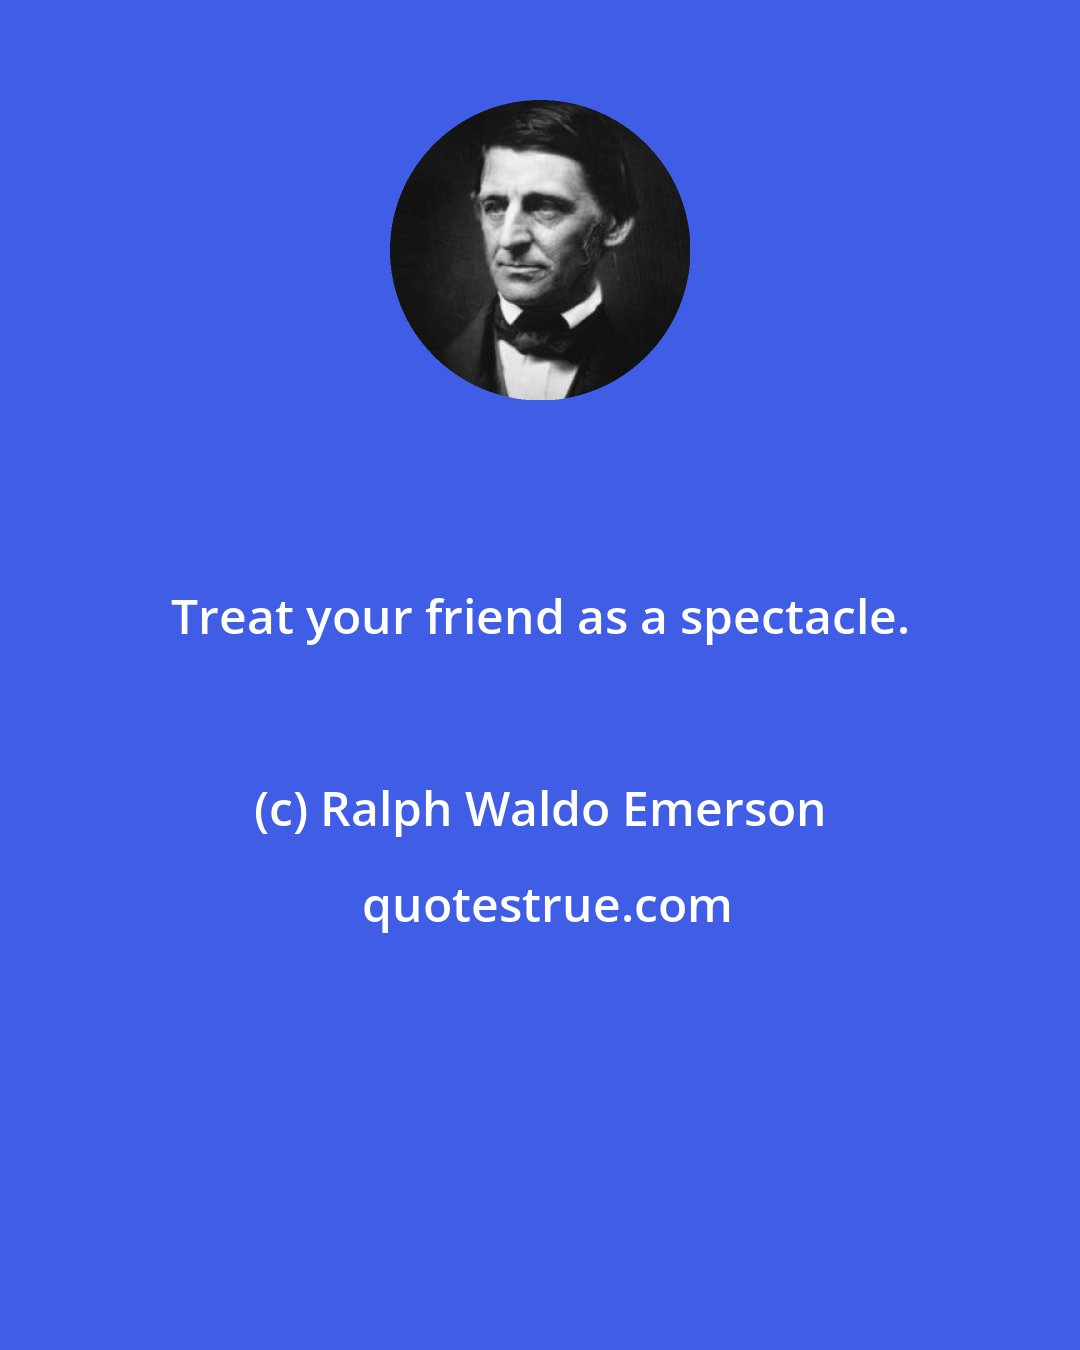 Ralph Waldo Emerson: Treat your friend as a spectacle.